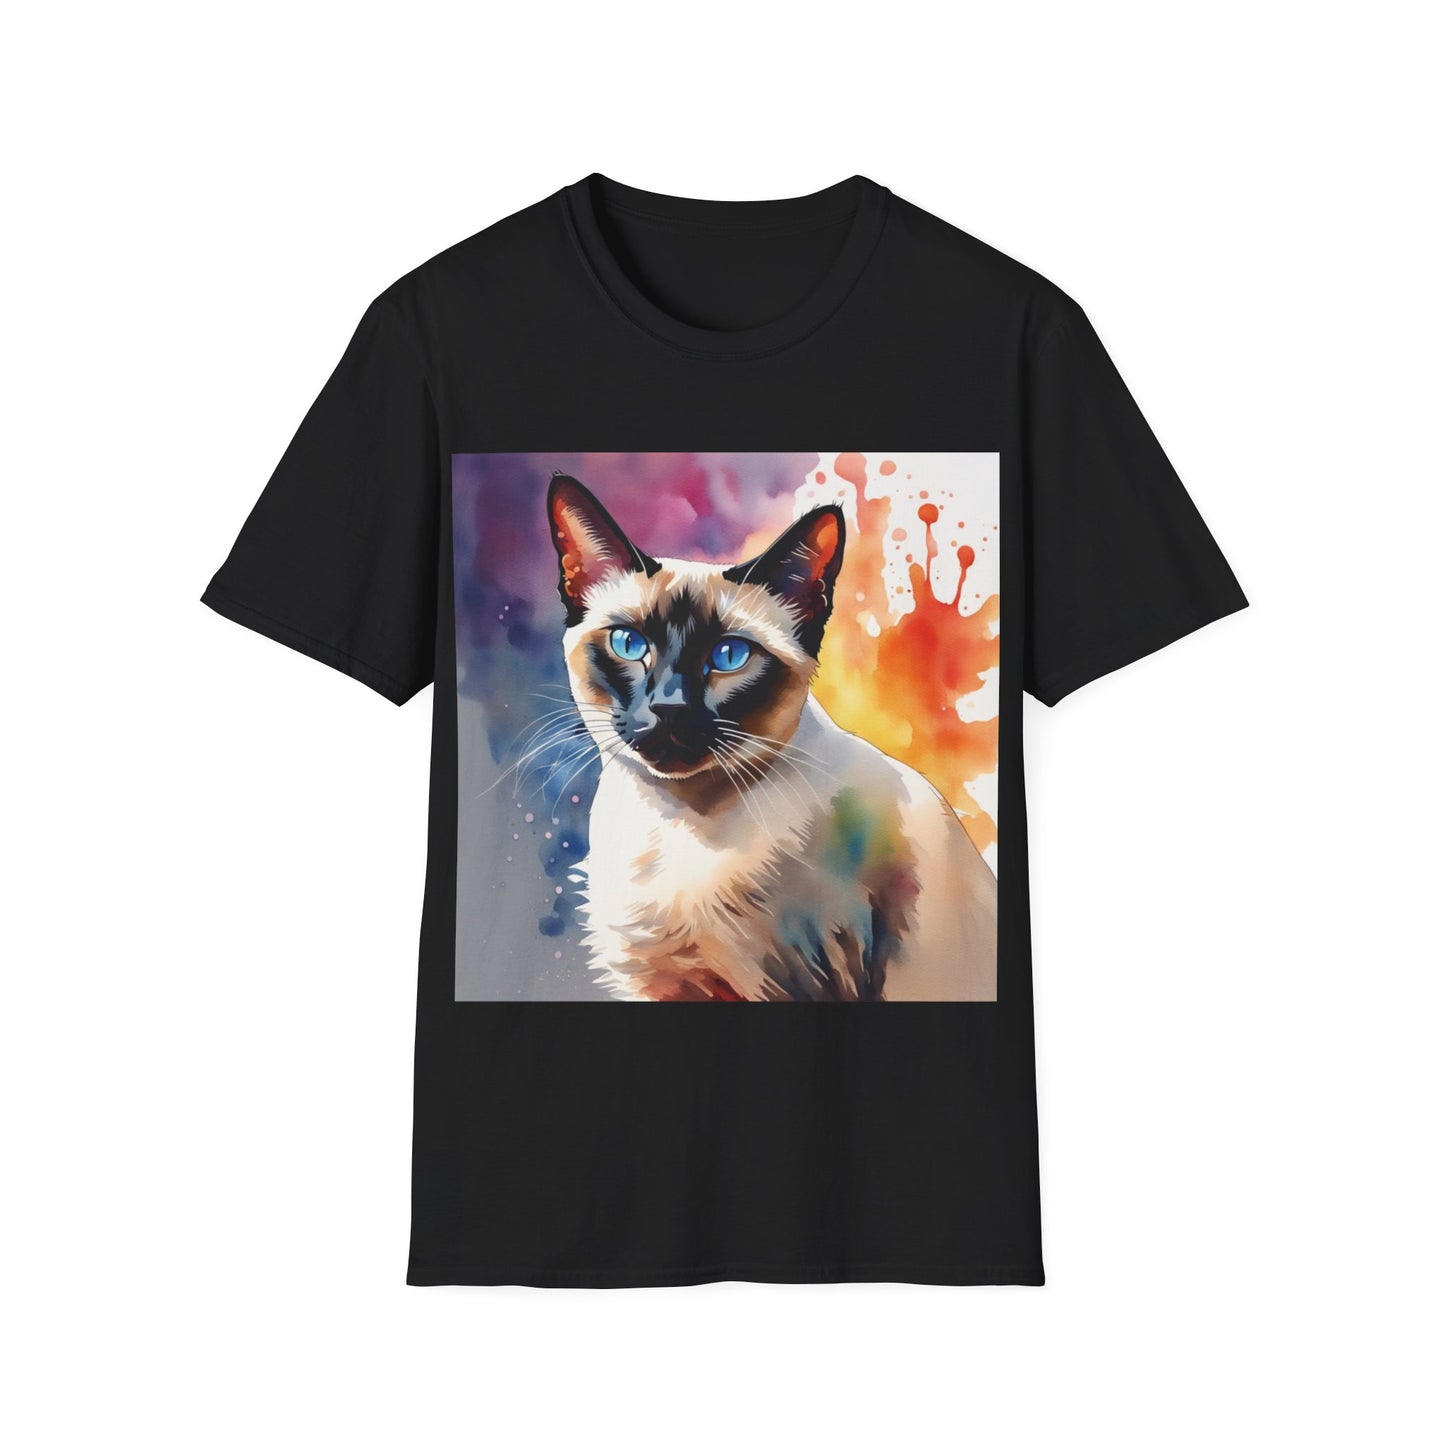 A black t-shirt with a watercolour painting of a siamese cat.